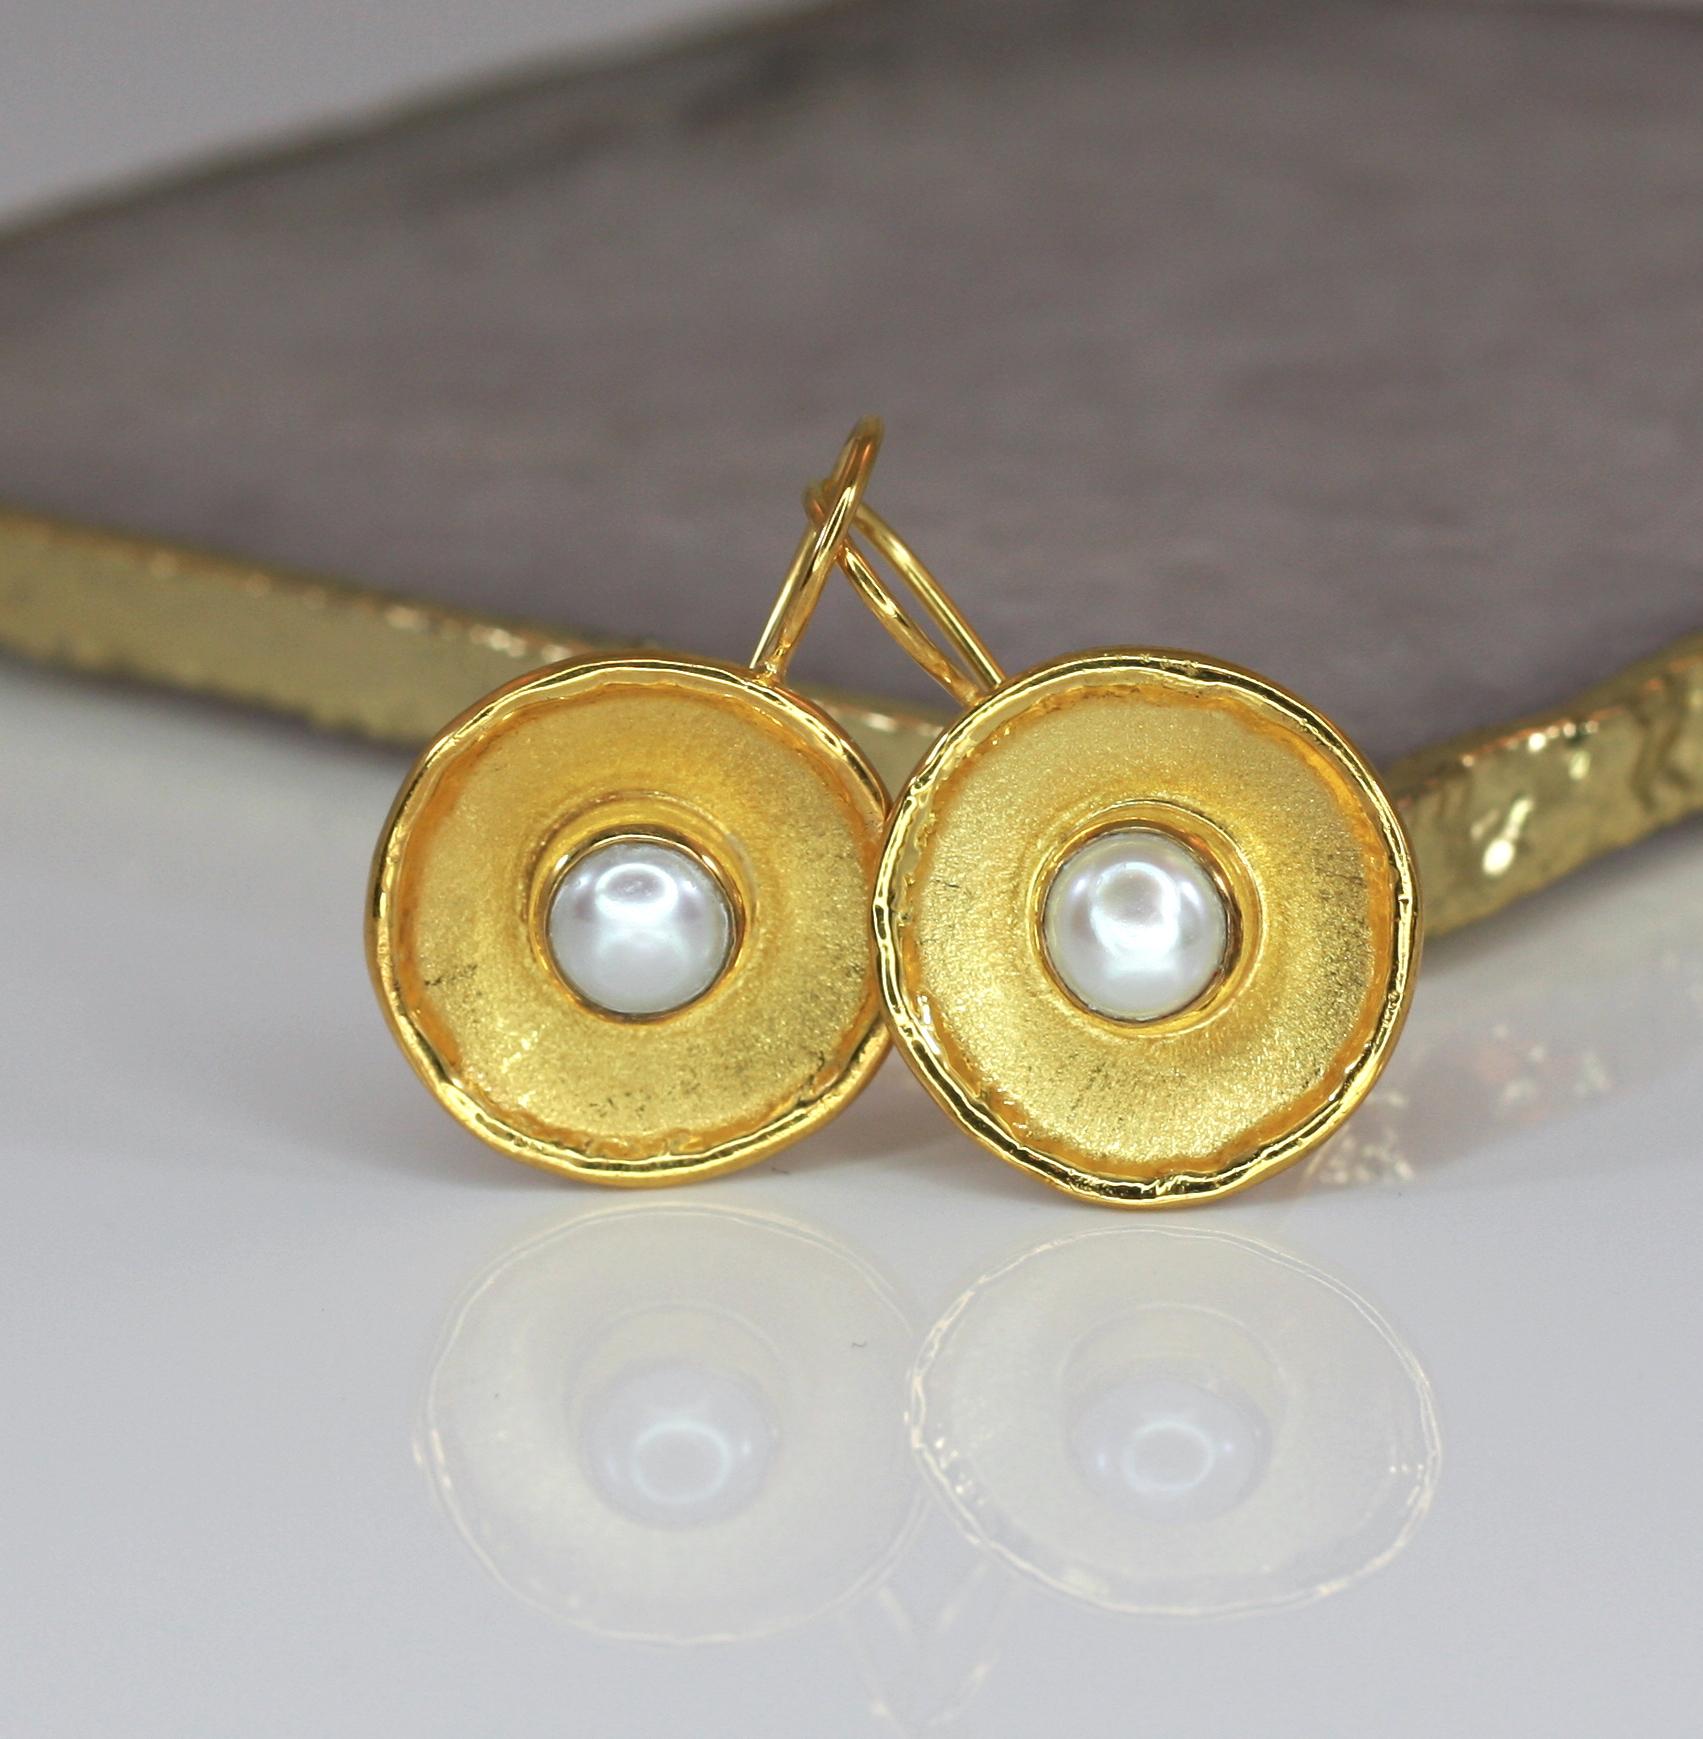 These are Yianni Creations handmade artisan earrings crafted in Greece from 18 Karat Yellow Gold. These round dangle earrings feature 7MM freshwater pearl. The unique look is created by combining two ancient techniques - brushed texture and